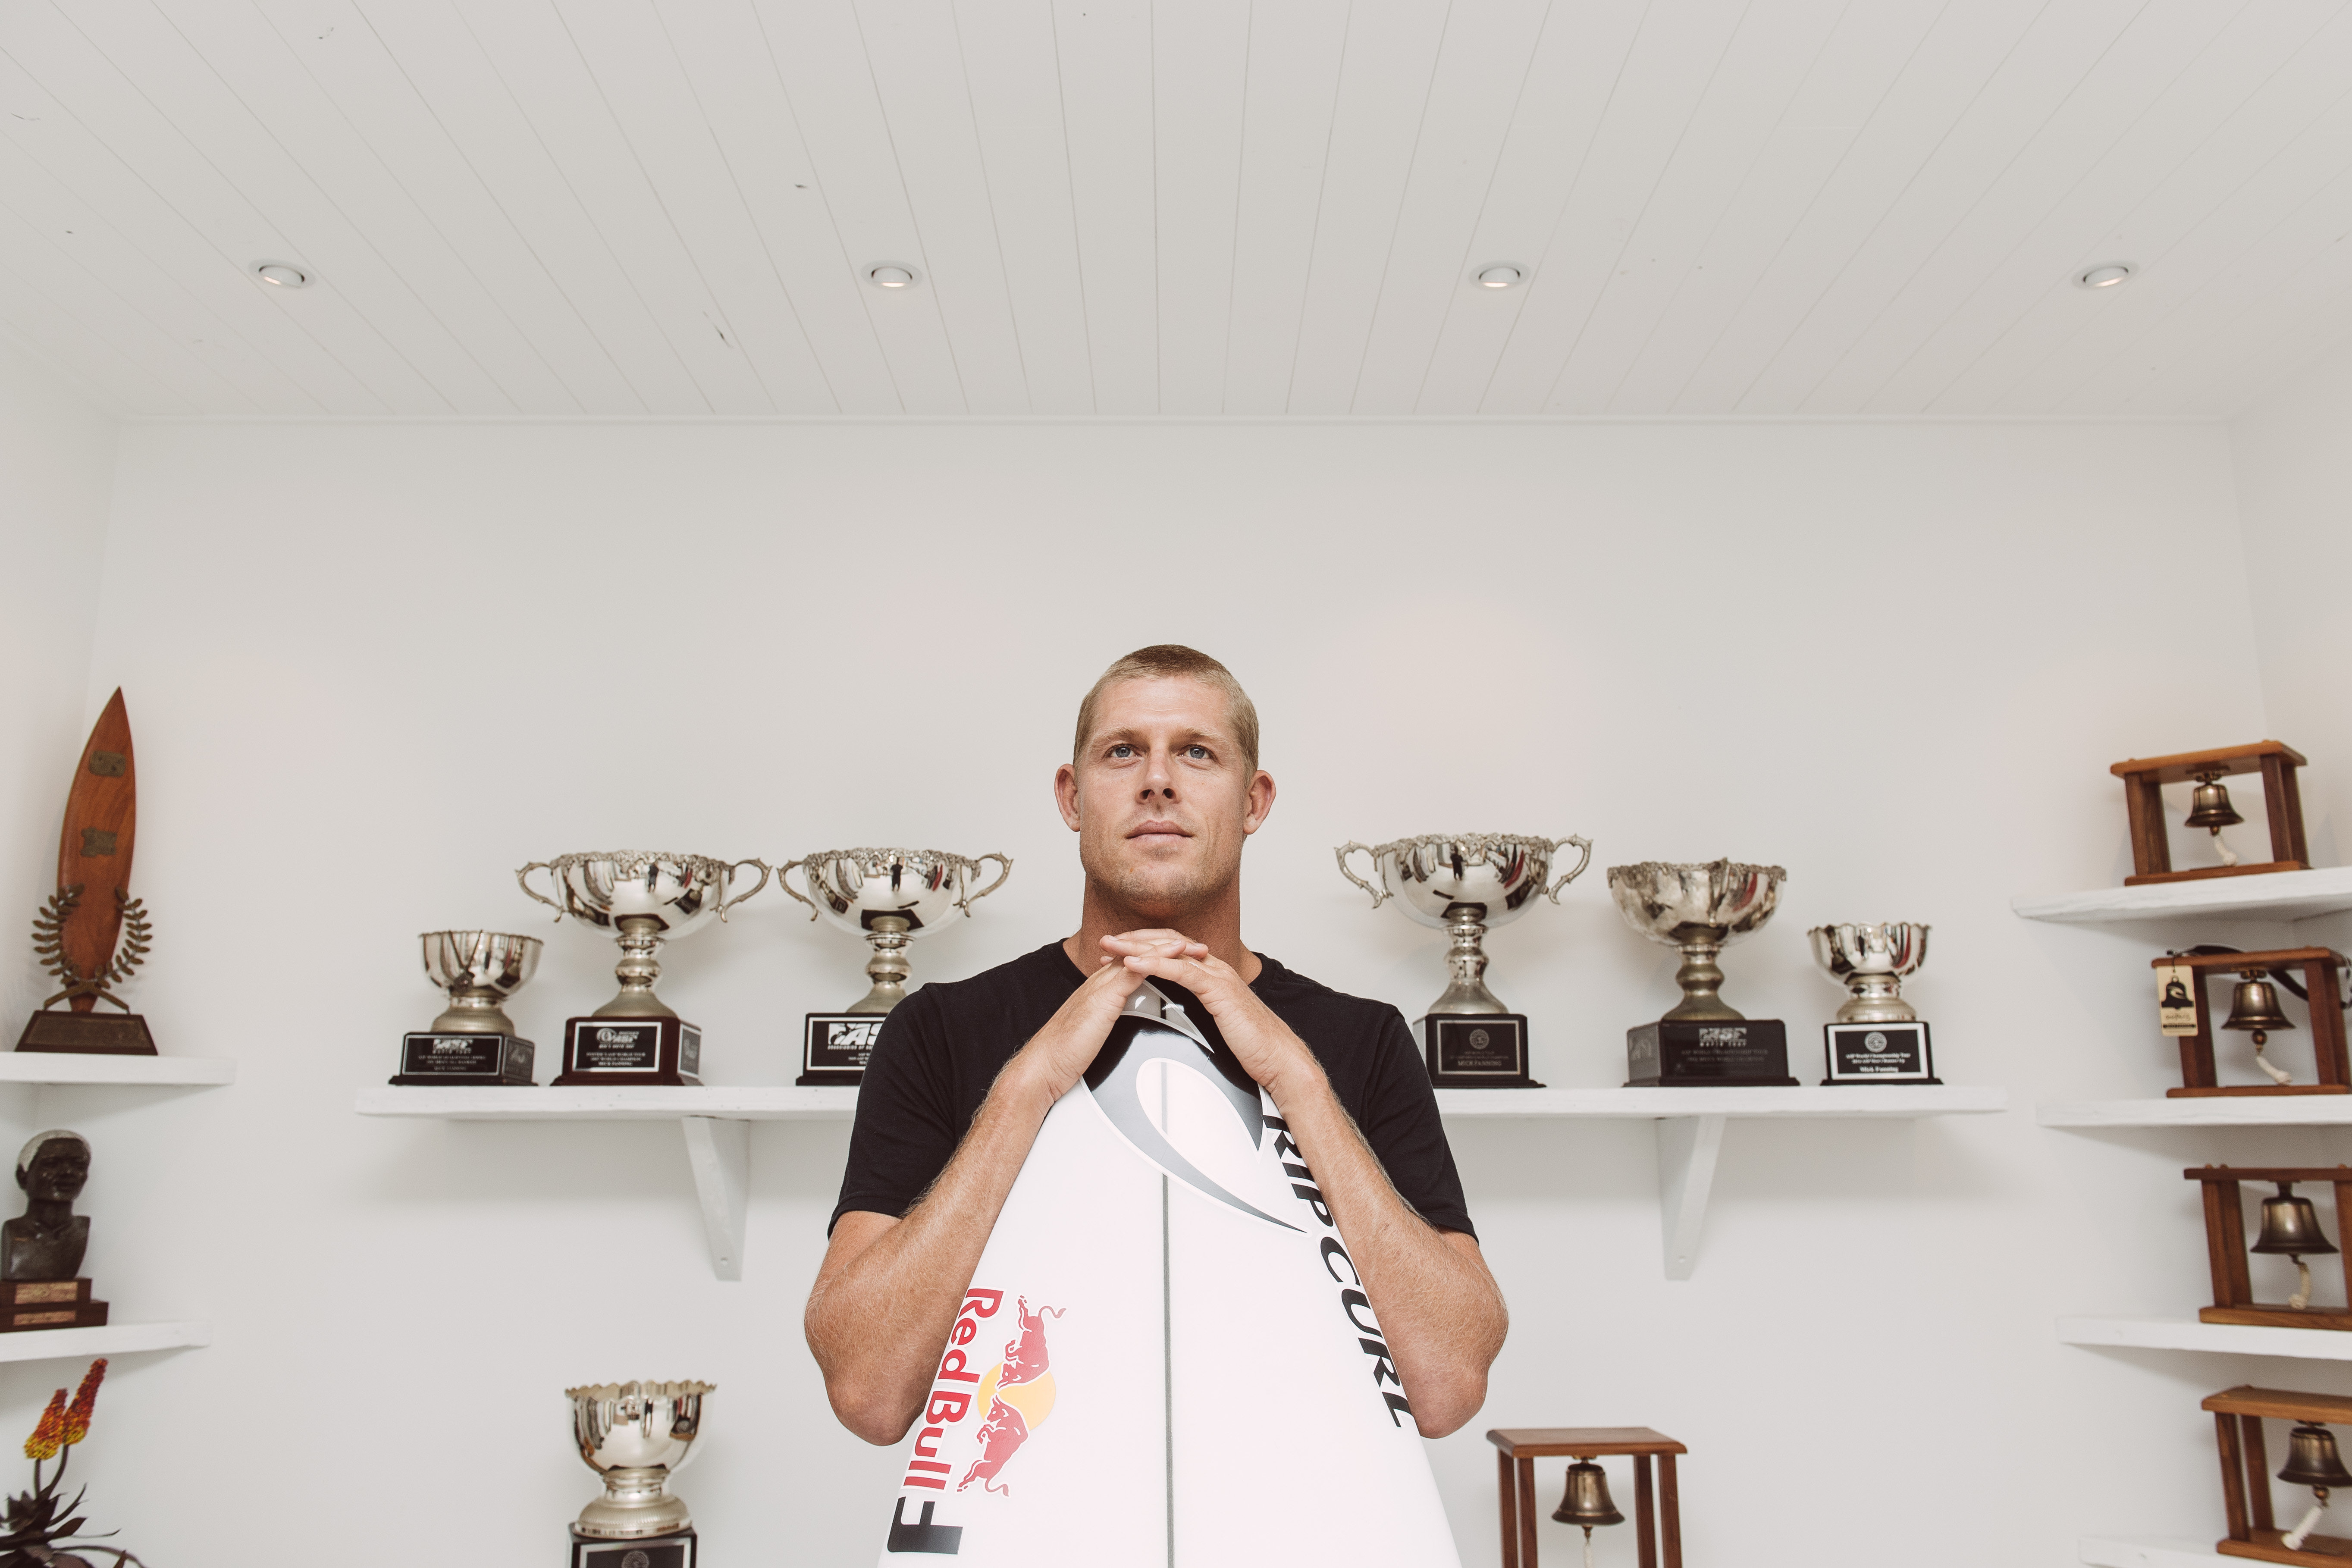 3 x world champ mick fanning announces his retirement from wsl world